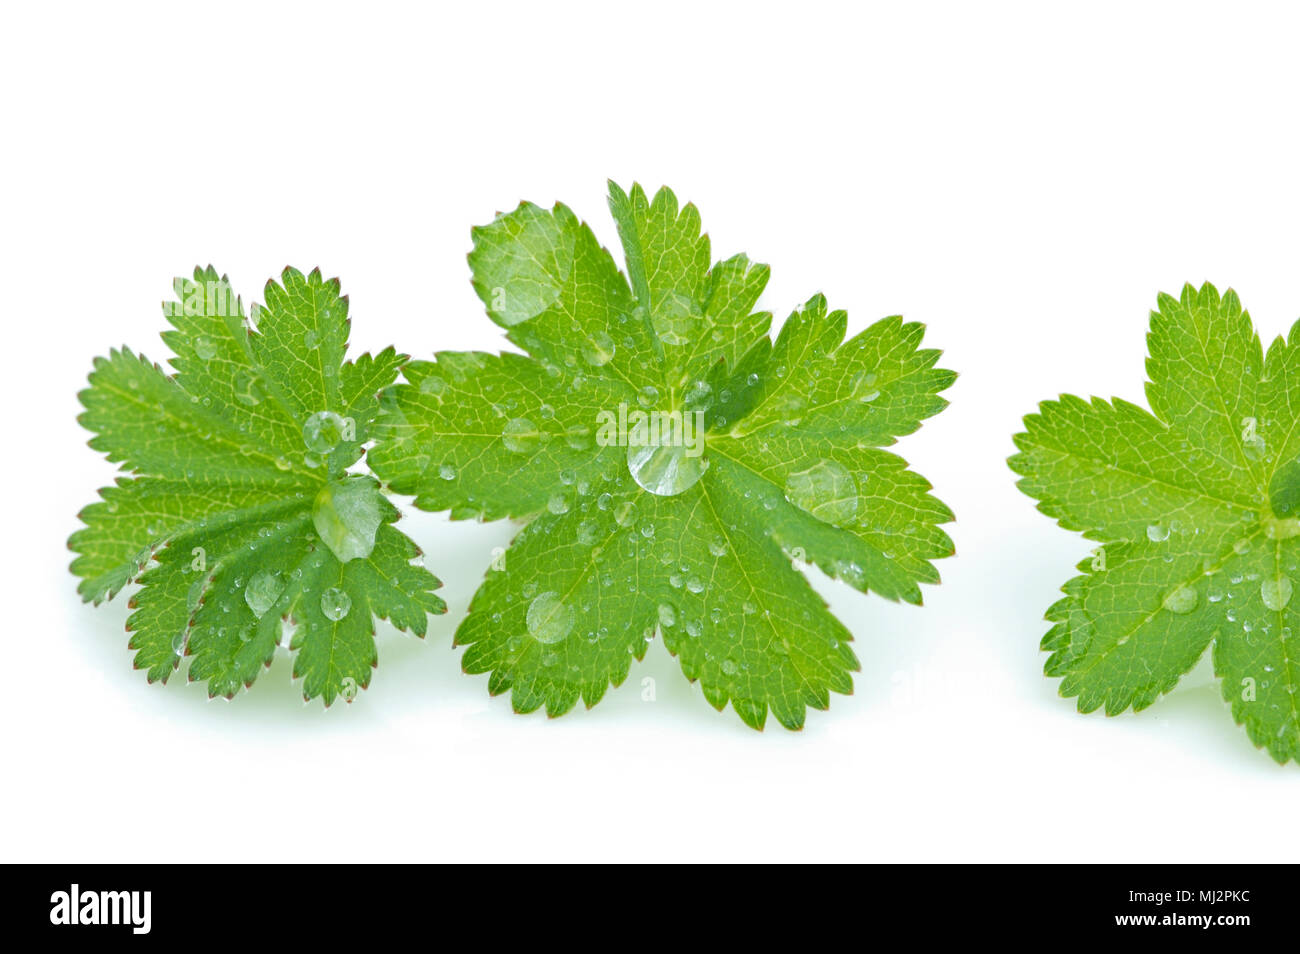 Lady's mantle leaves on white background Stock Photo